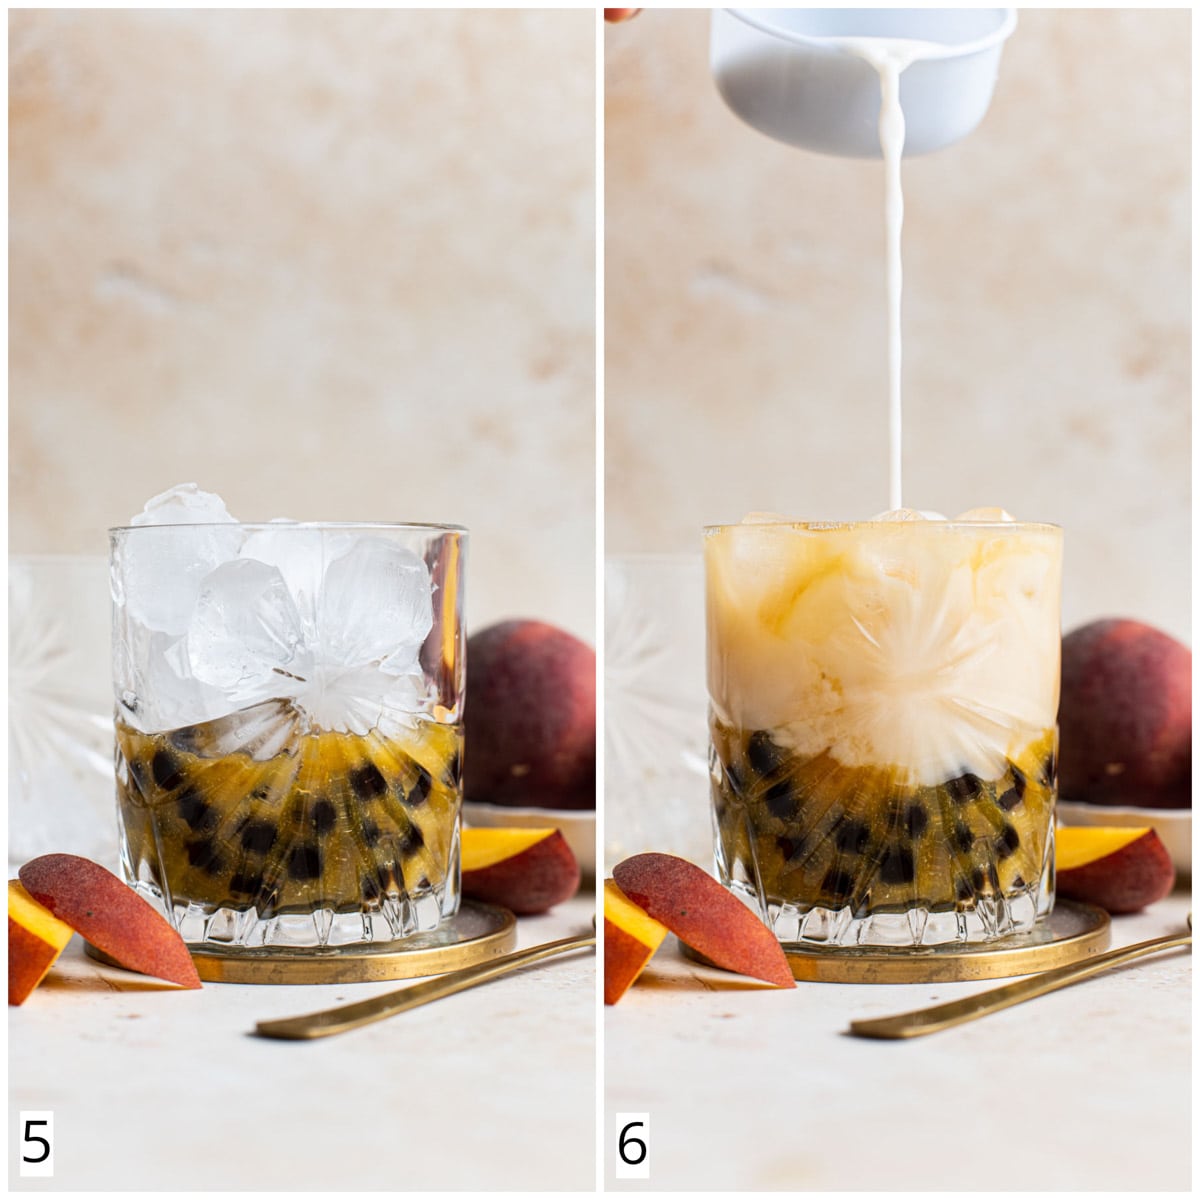 A collage of two images showing how to serve peach milk tea.